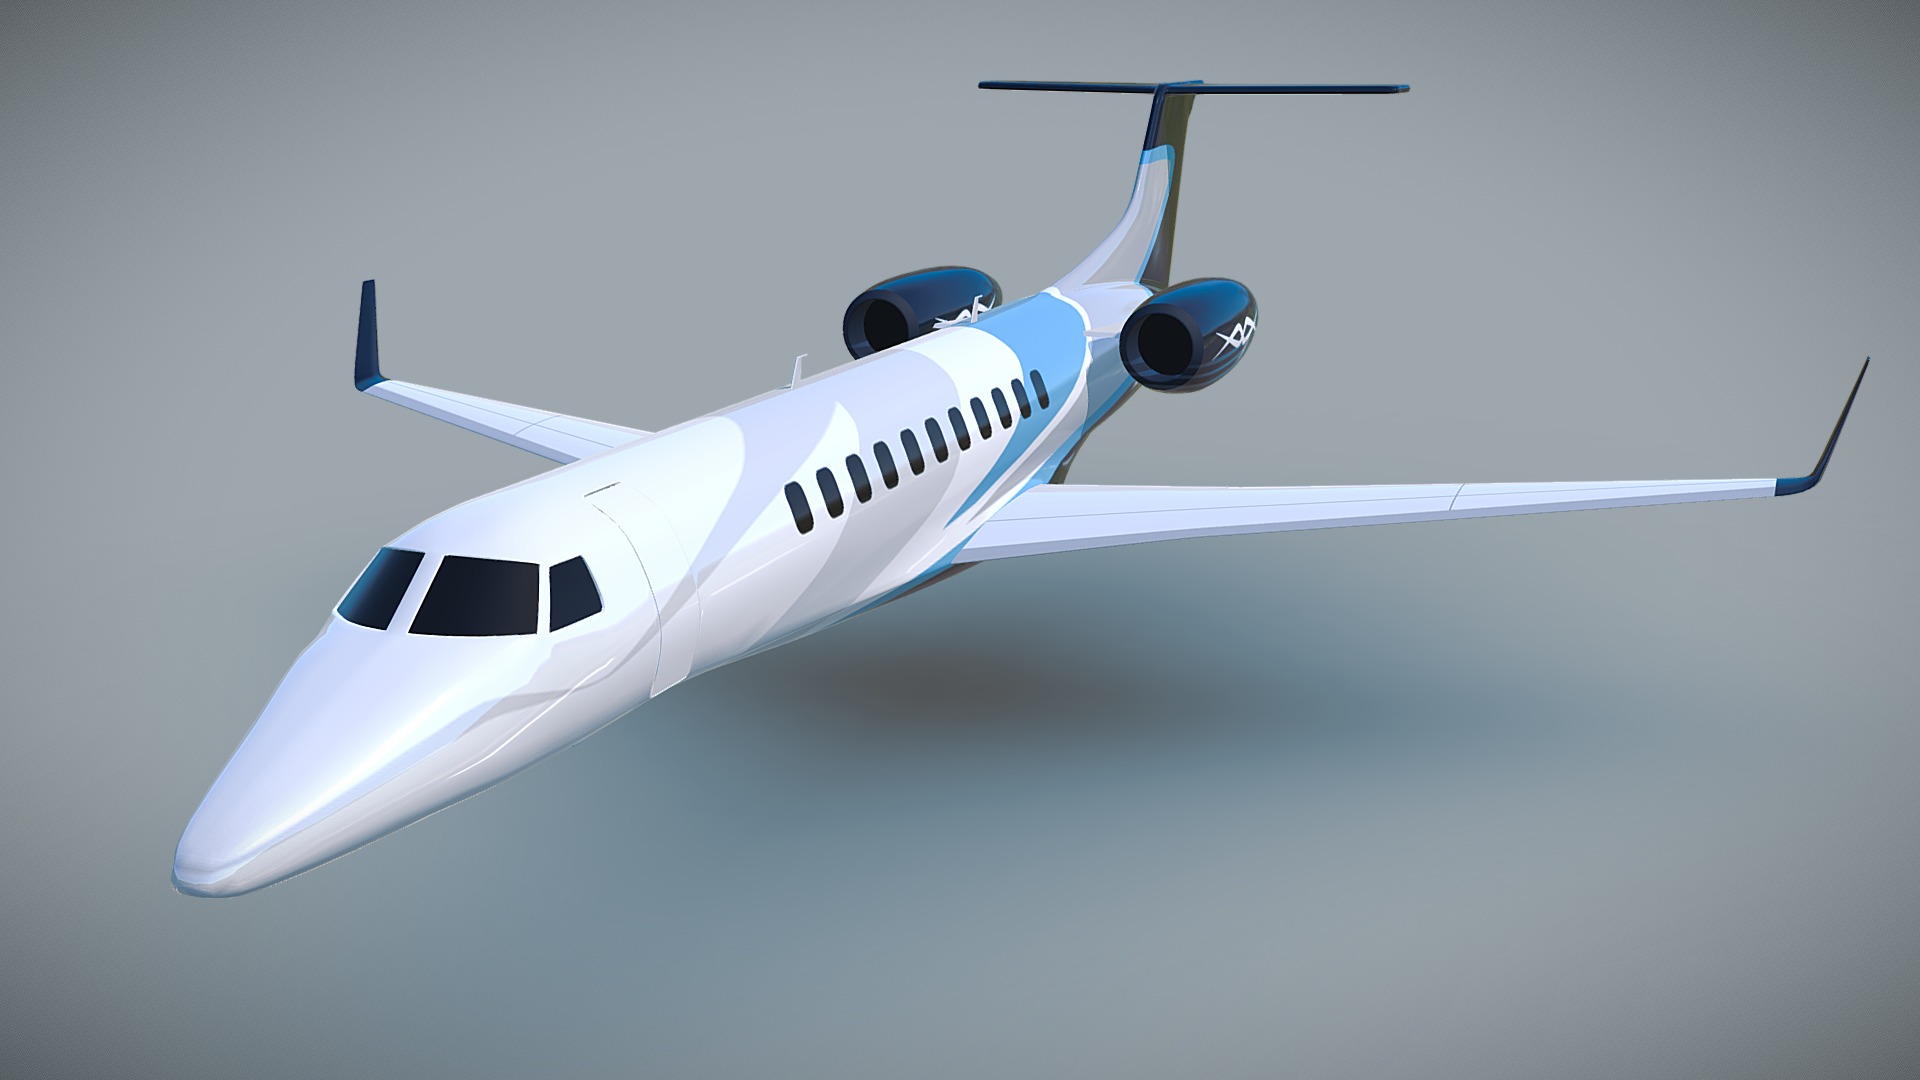 3D model Embraer Legacy 650 private jet - This is a 3D model of the Embraer Legacy 650 private jet. The 3D model is about a white and blue airplane.